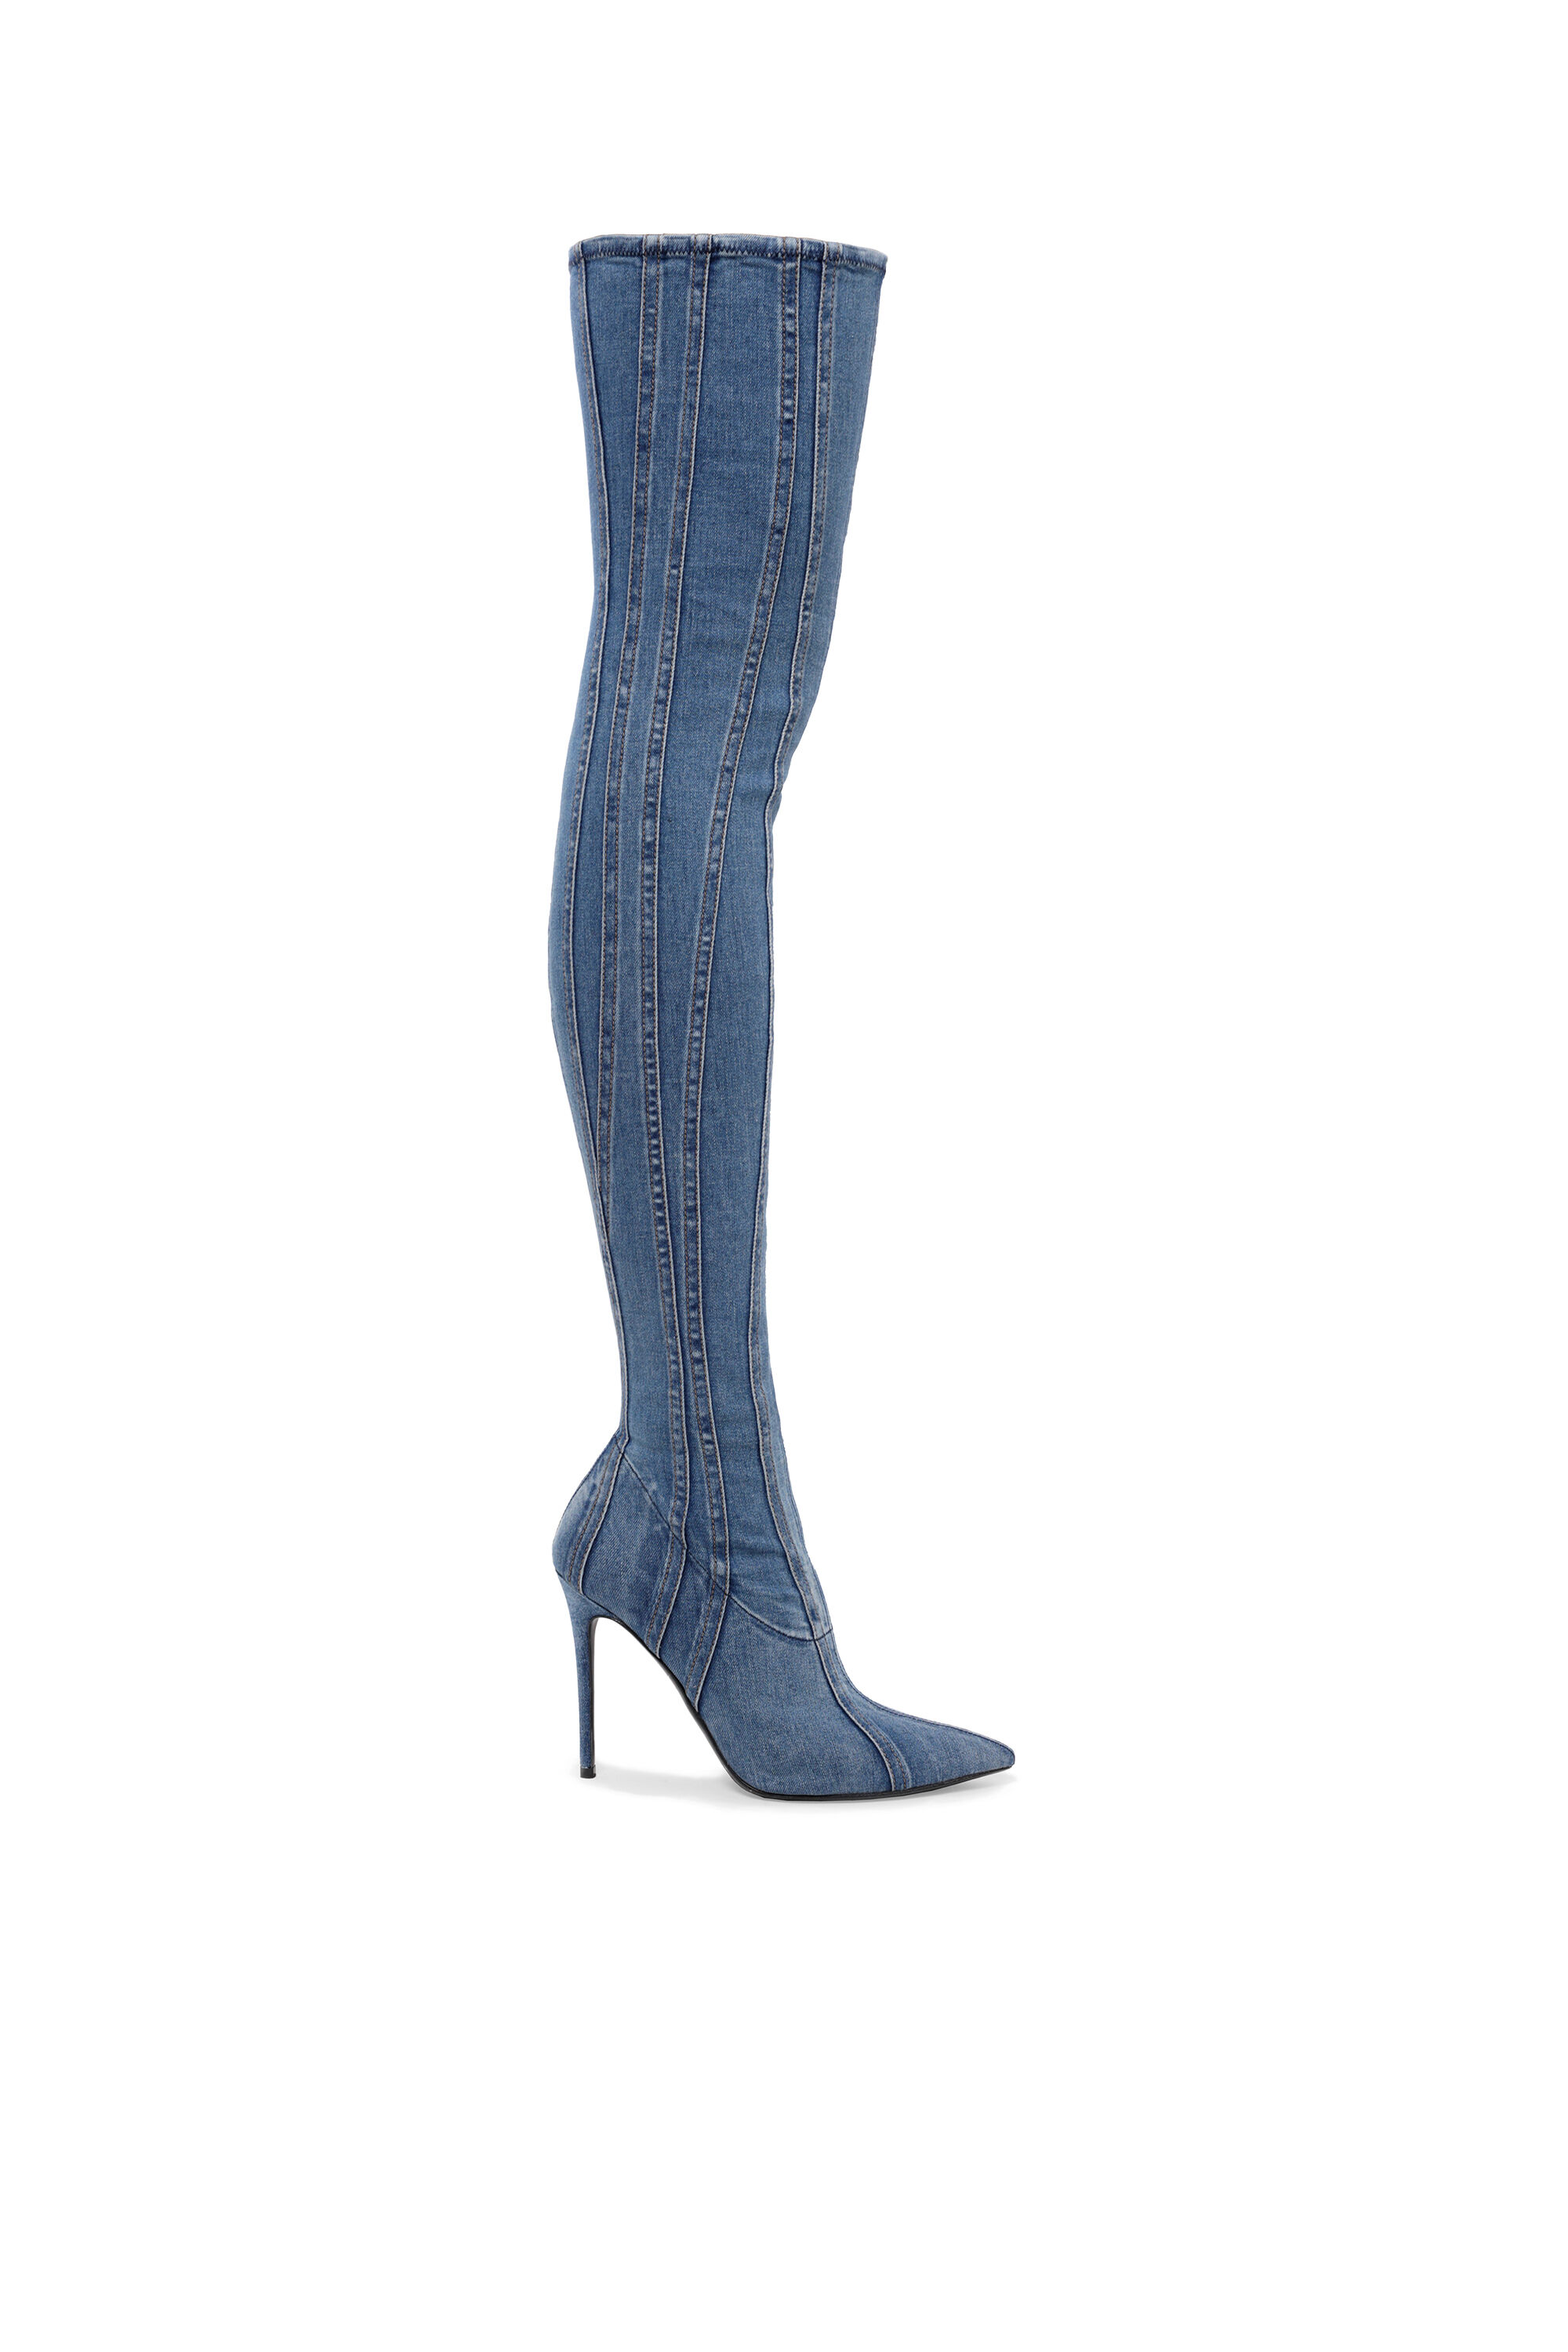 Diesel - D-YUCCA OTK, Woman D-Yucca Otk - Over-the-knee boots in denim in Blue - Image 1